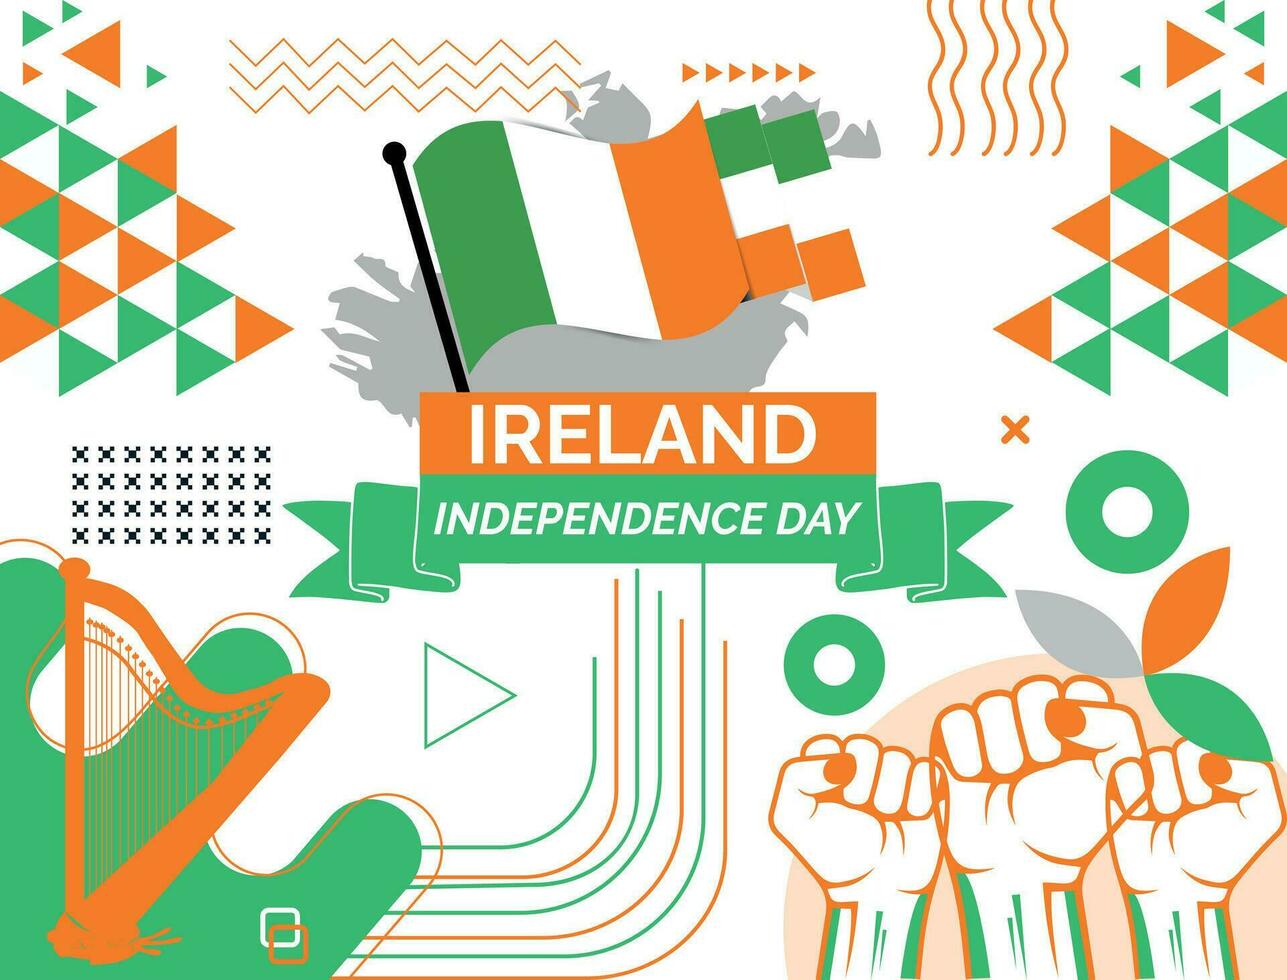 Ireland national day banner design. Ireland flag and map theme with background. Template vector Ireland flag modern design. Abstract geometric retro shapes of Green and blue color.